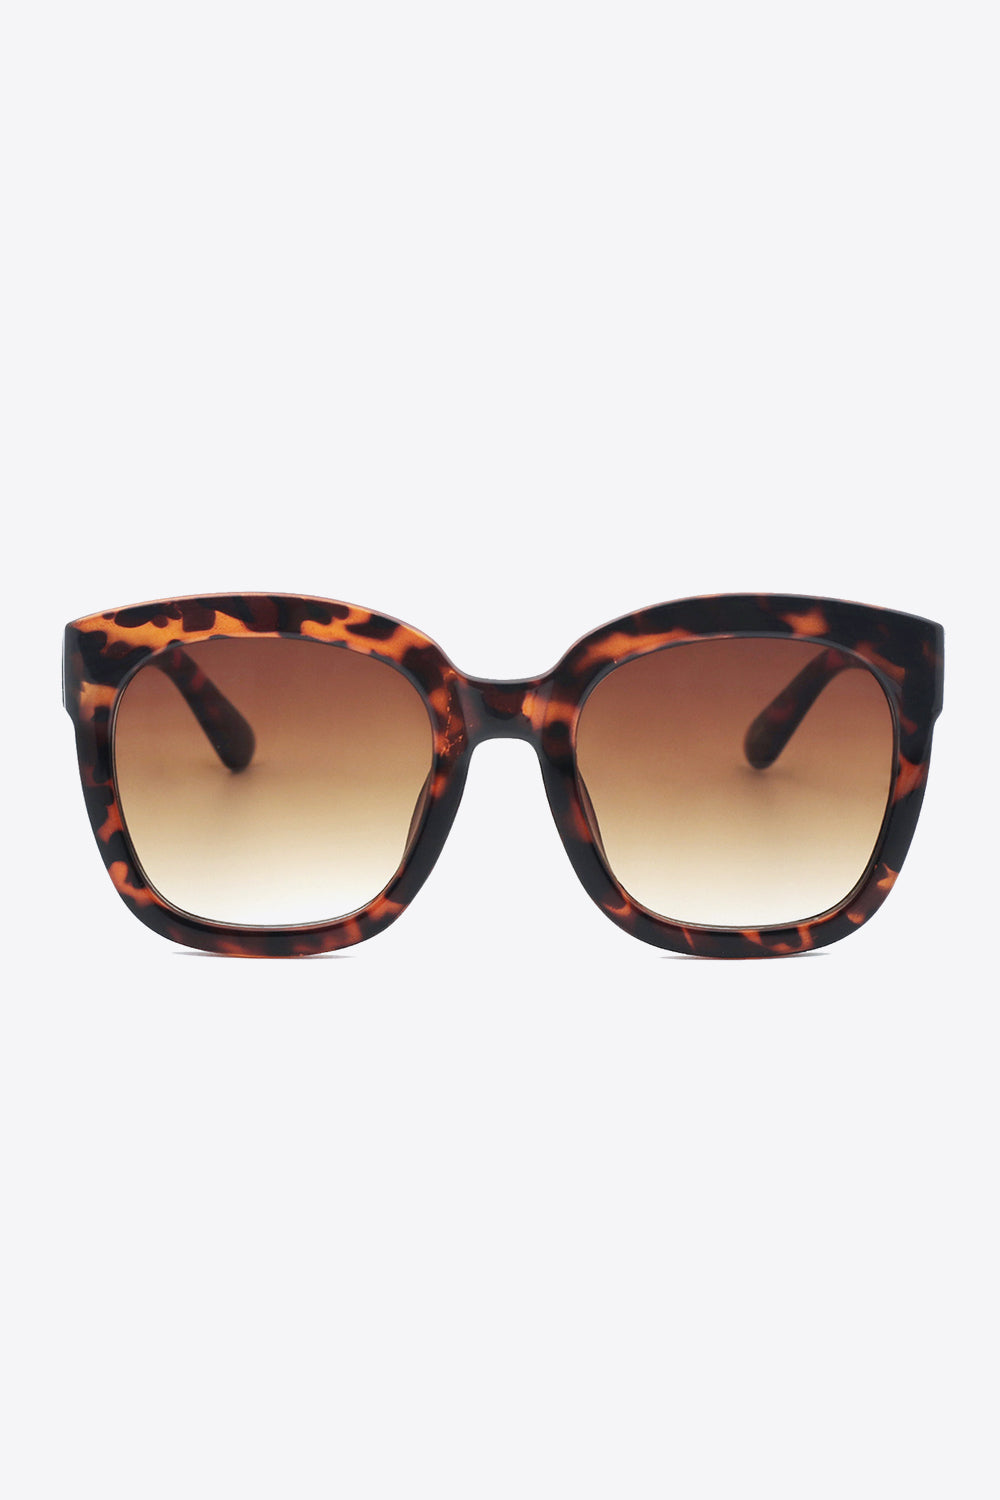 Geo Glam Sunglasses in Black and Brown